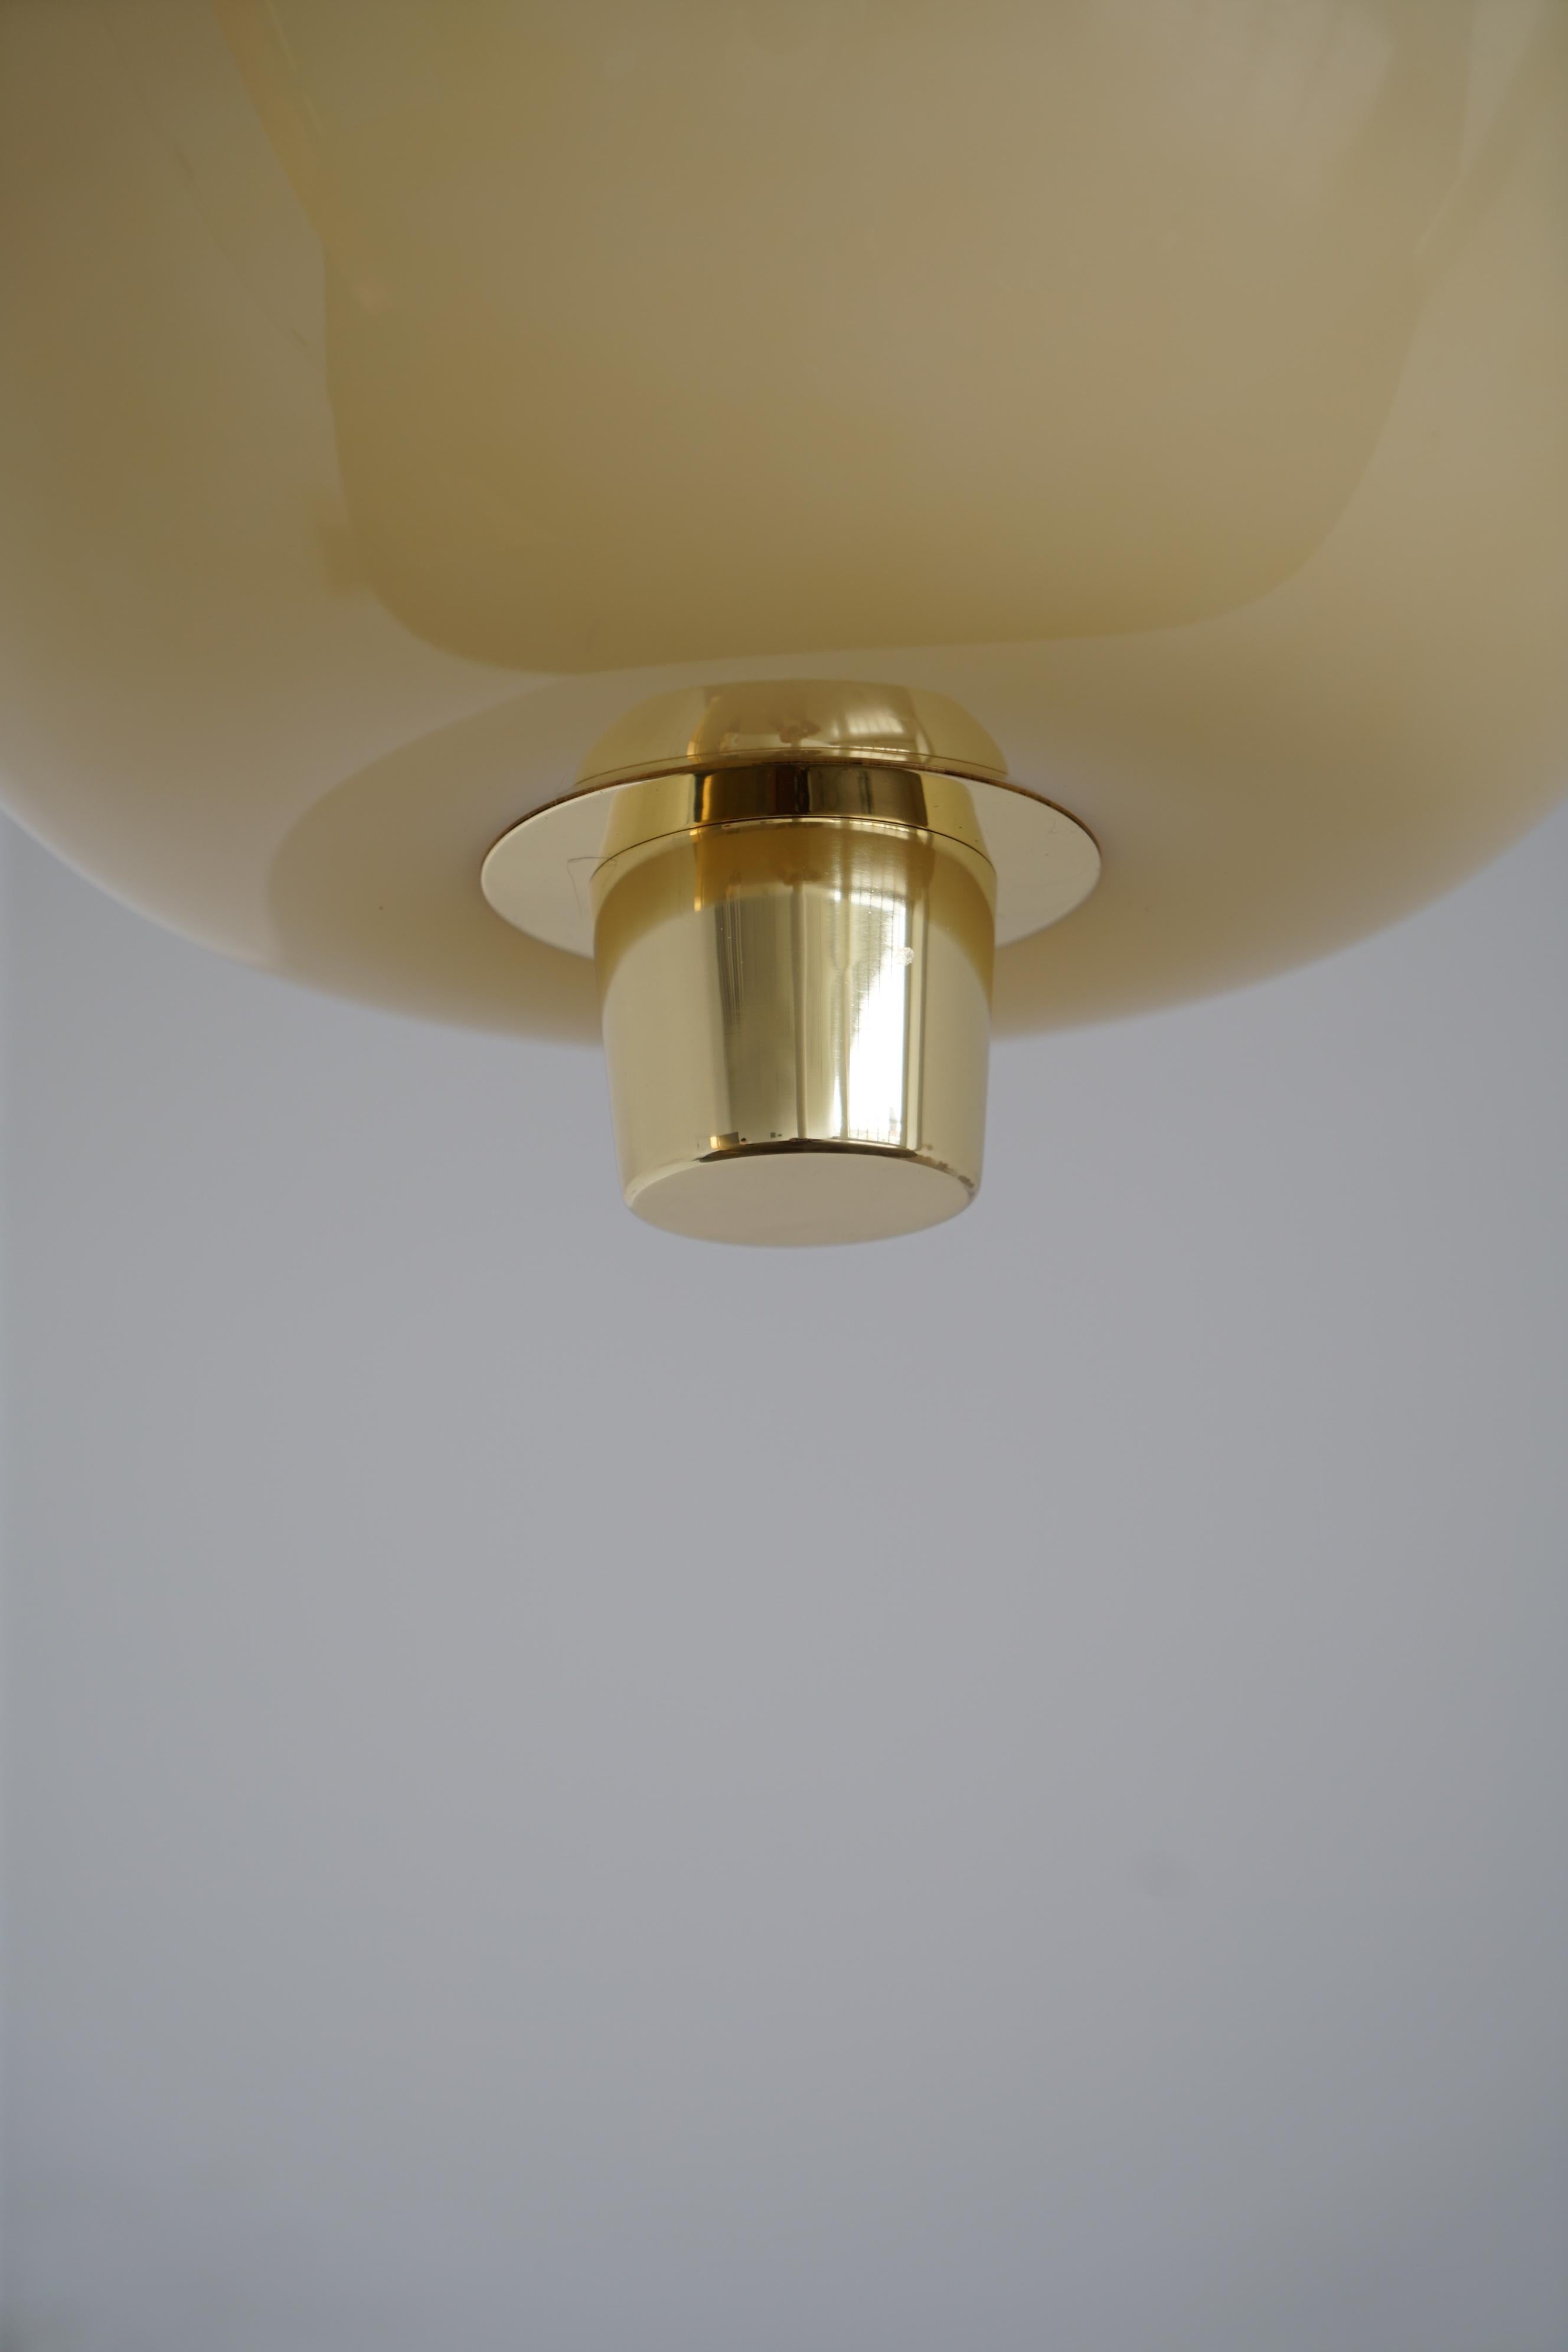 Scandinavian Modern Ceiling Light by Paavo Tynell, Model 9052 / 2 available For Sale